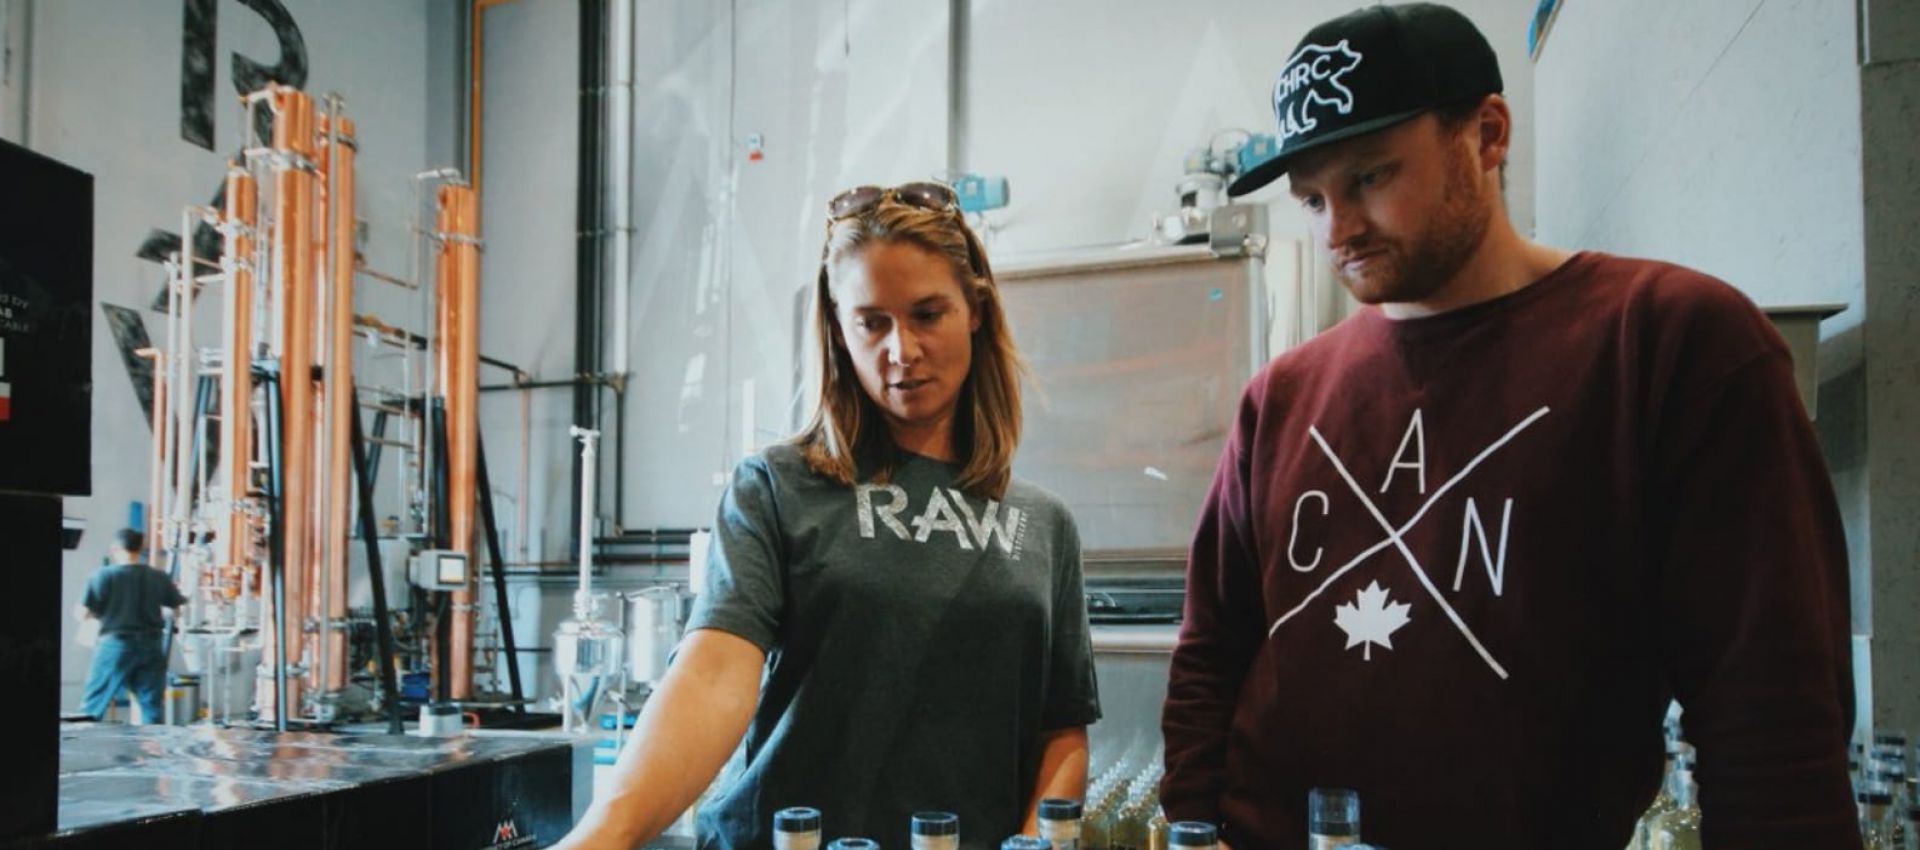 Photo for: Raw Distillery – Creating Handcrafted Small Batch Spirits